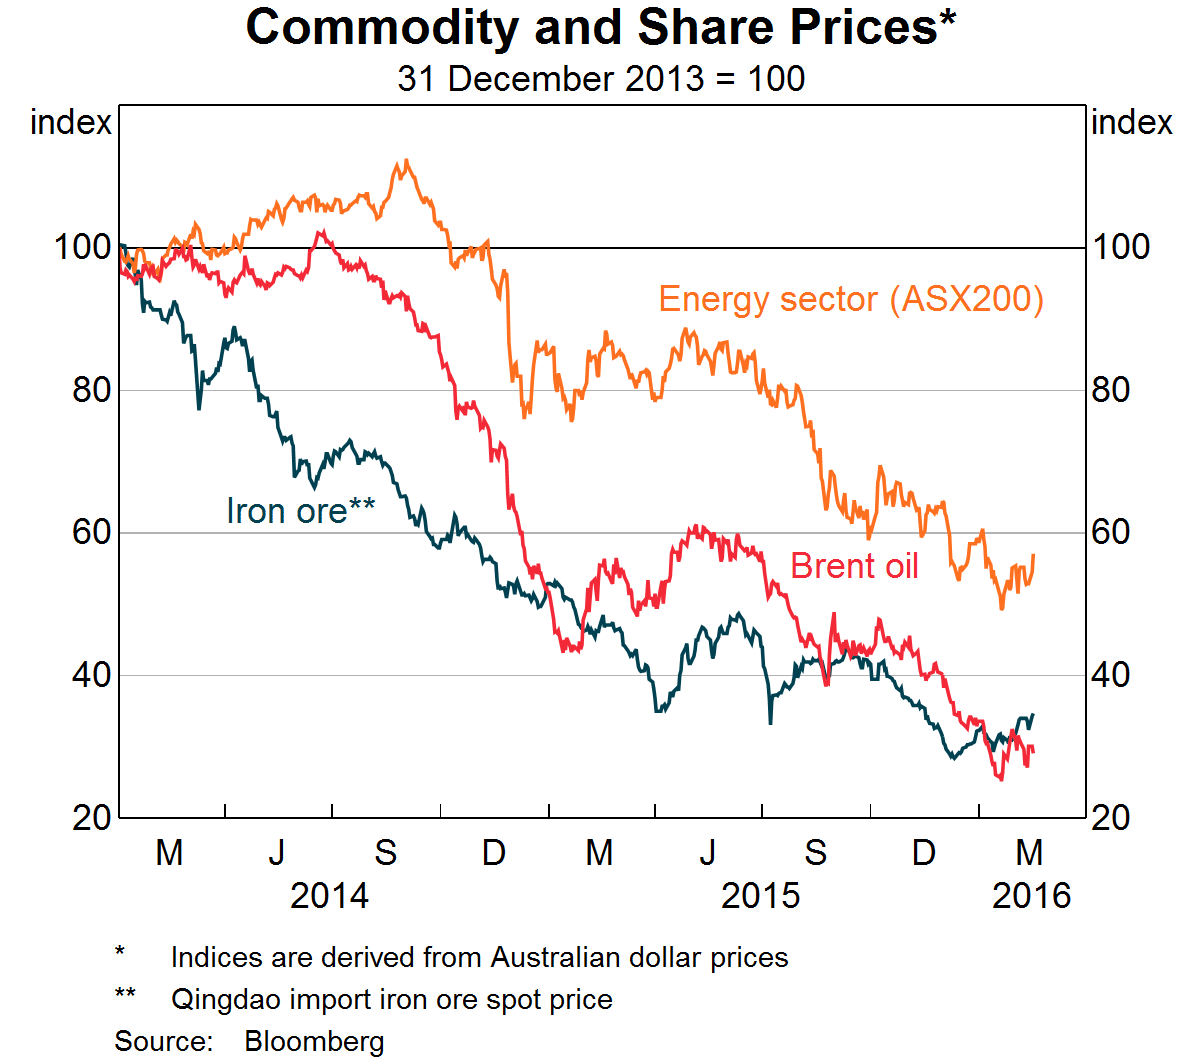 Commodity and Share Prices